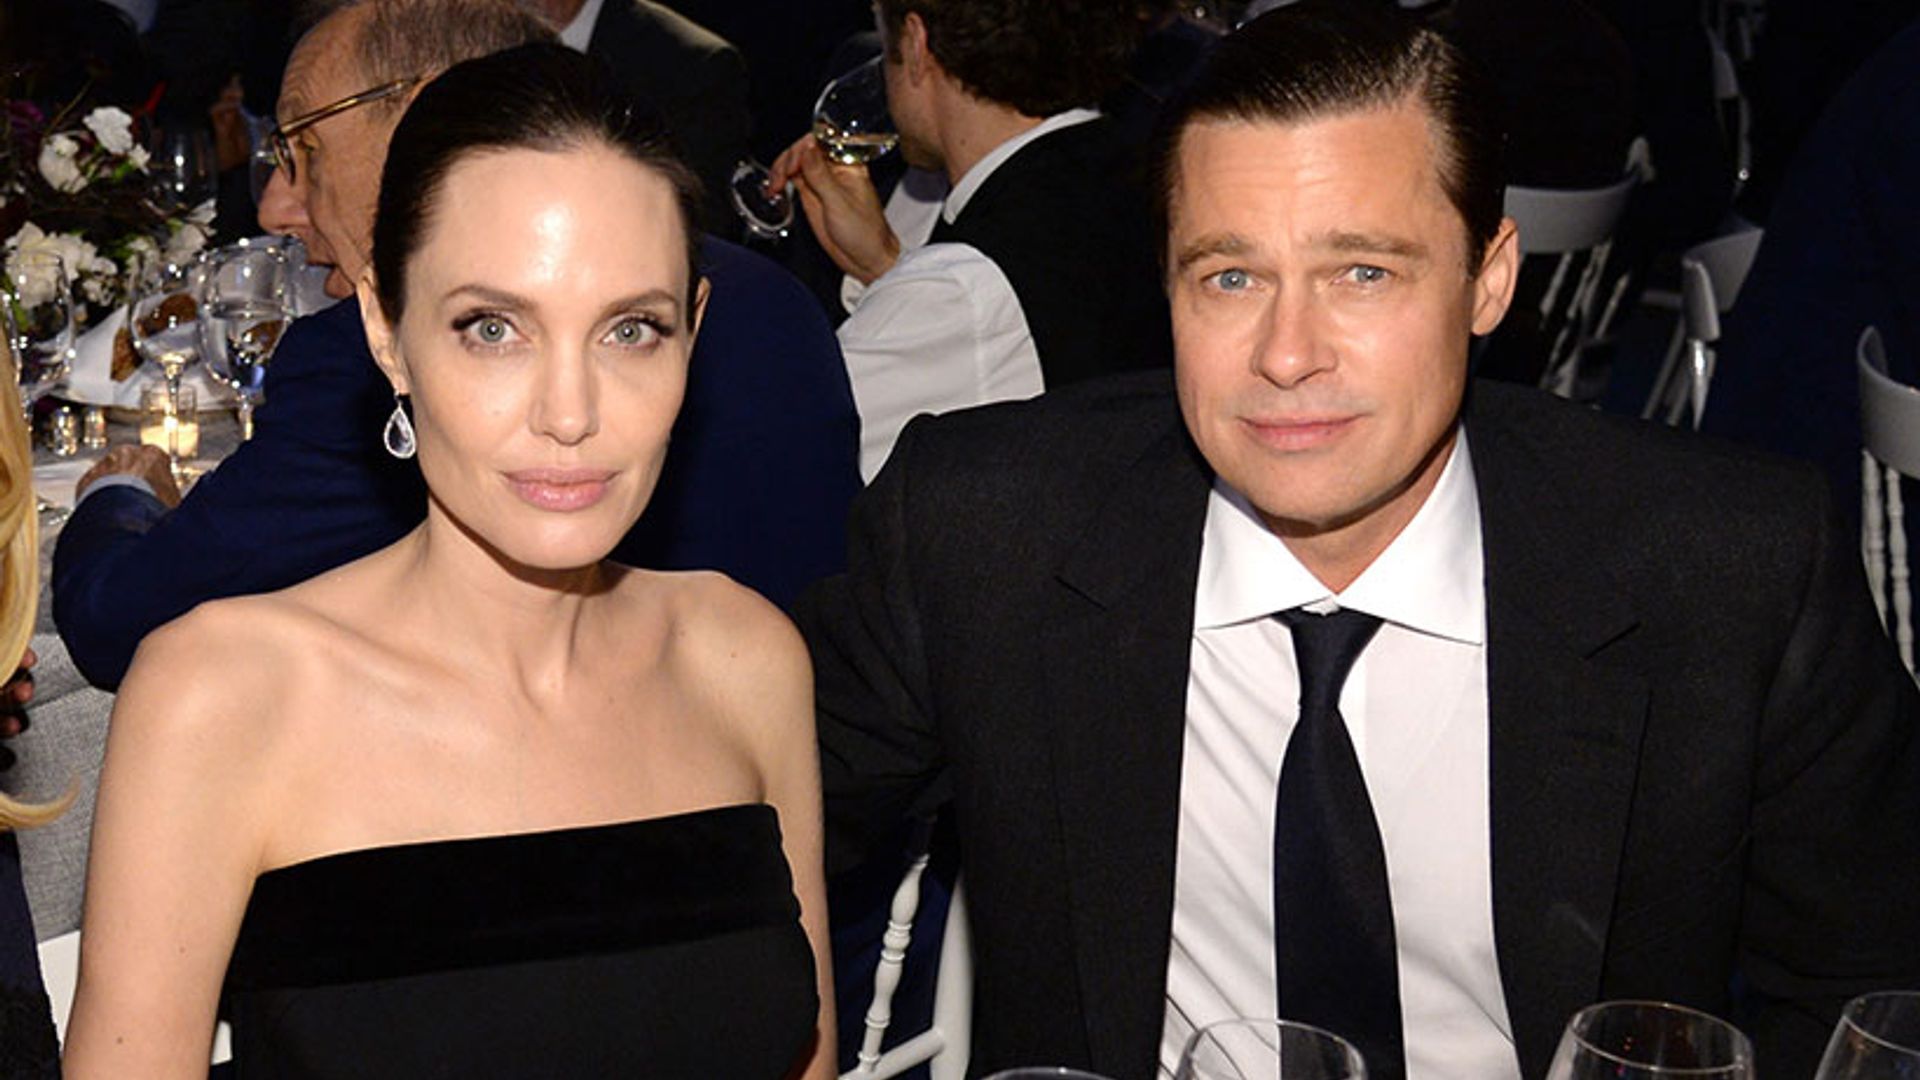 Brad Pitt and Angelina Jolie: Their love story in pictures